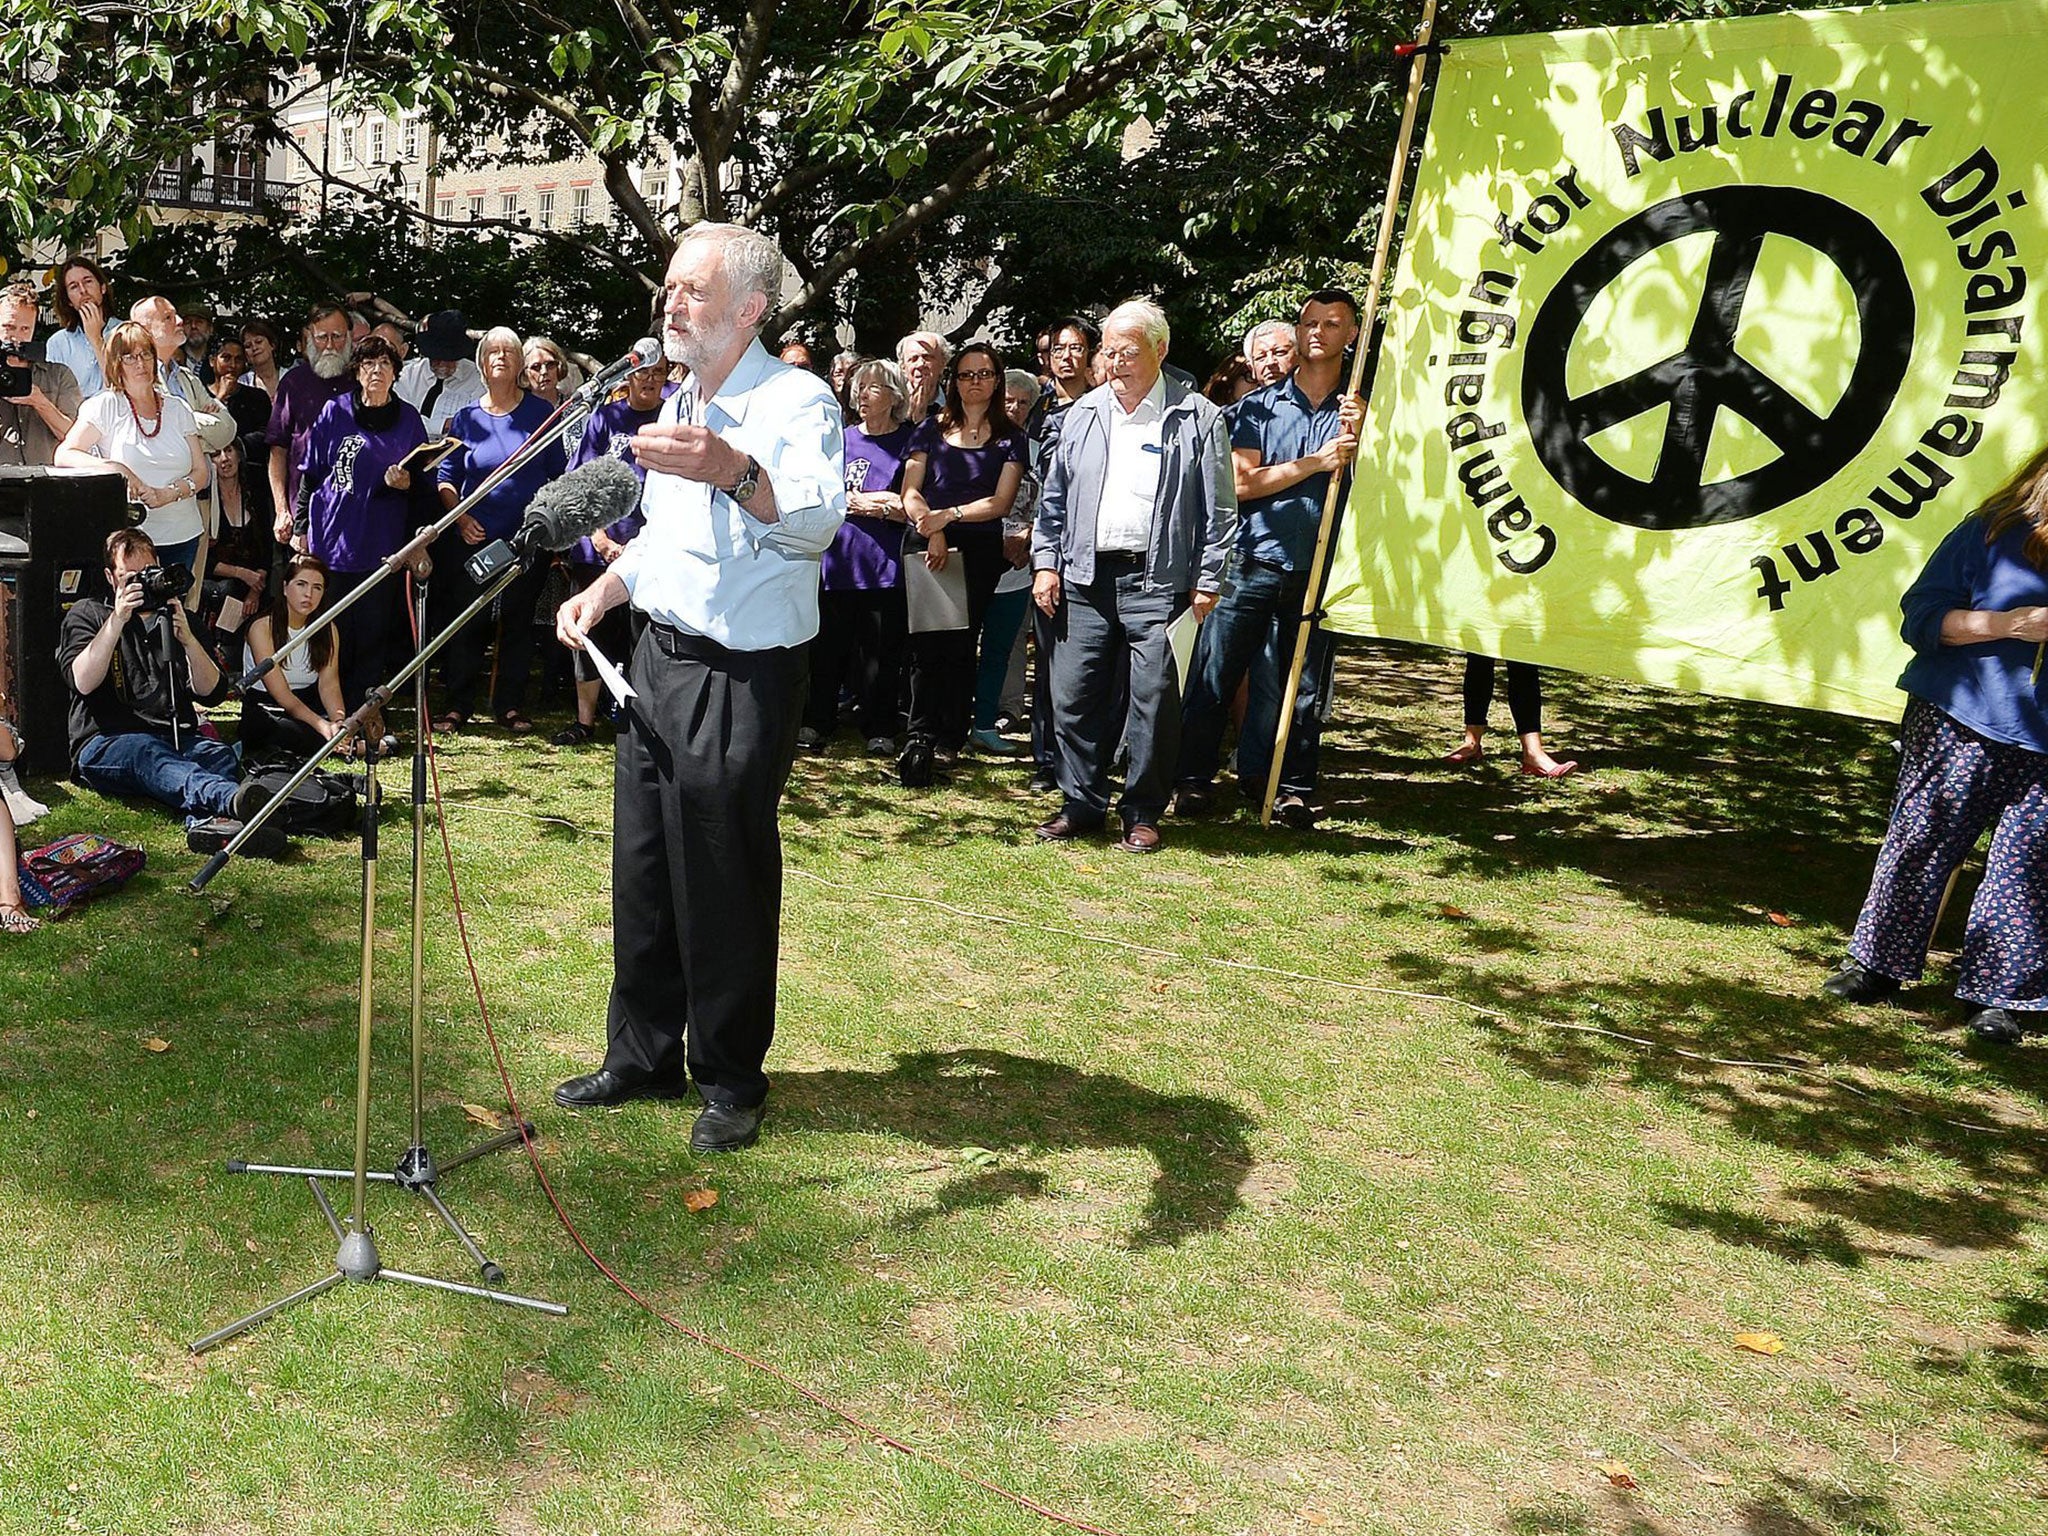 Jeremy Corbyn speaks during an event to mark the 70th anniversary of the Hiroshima